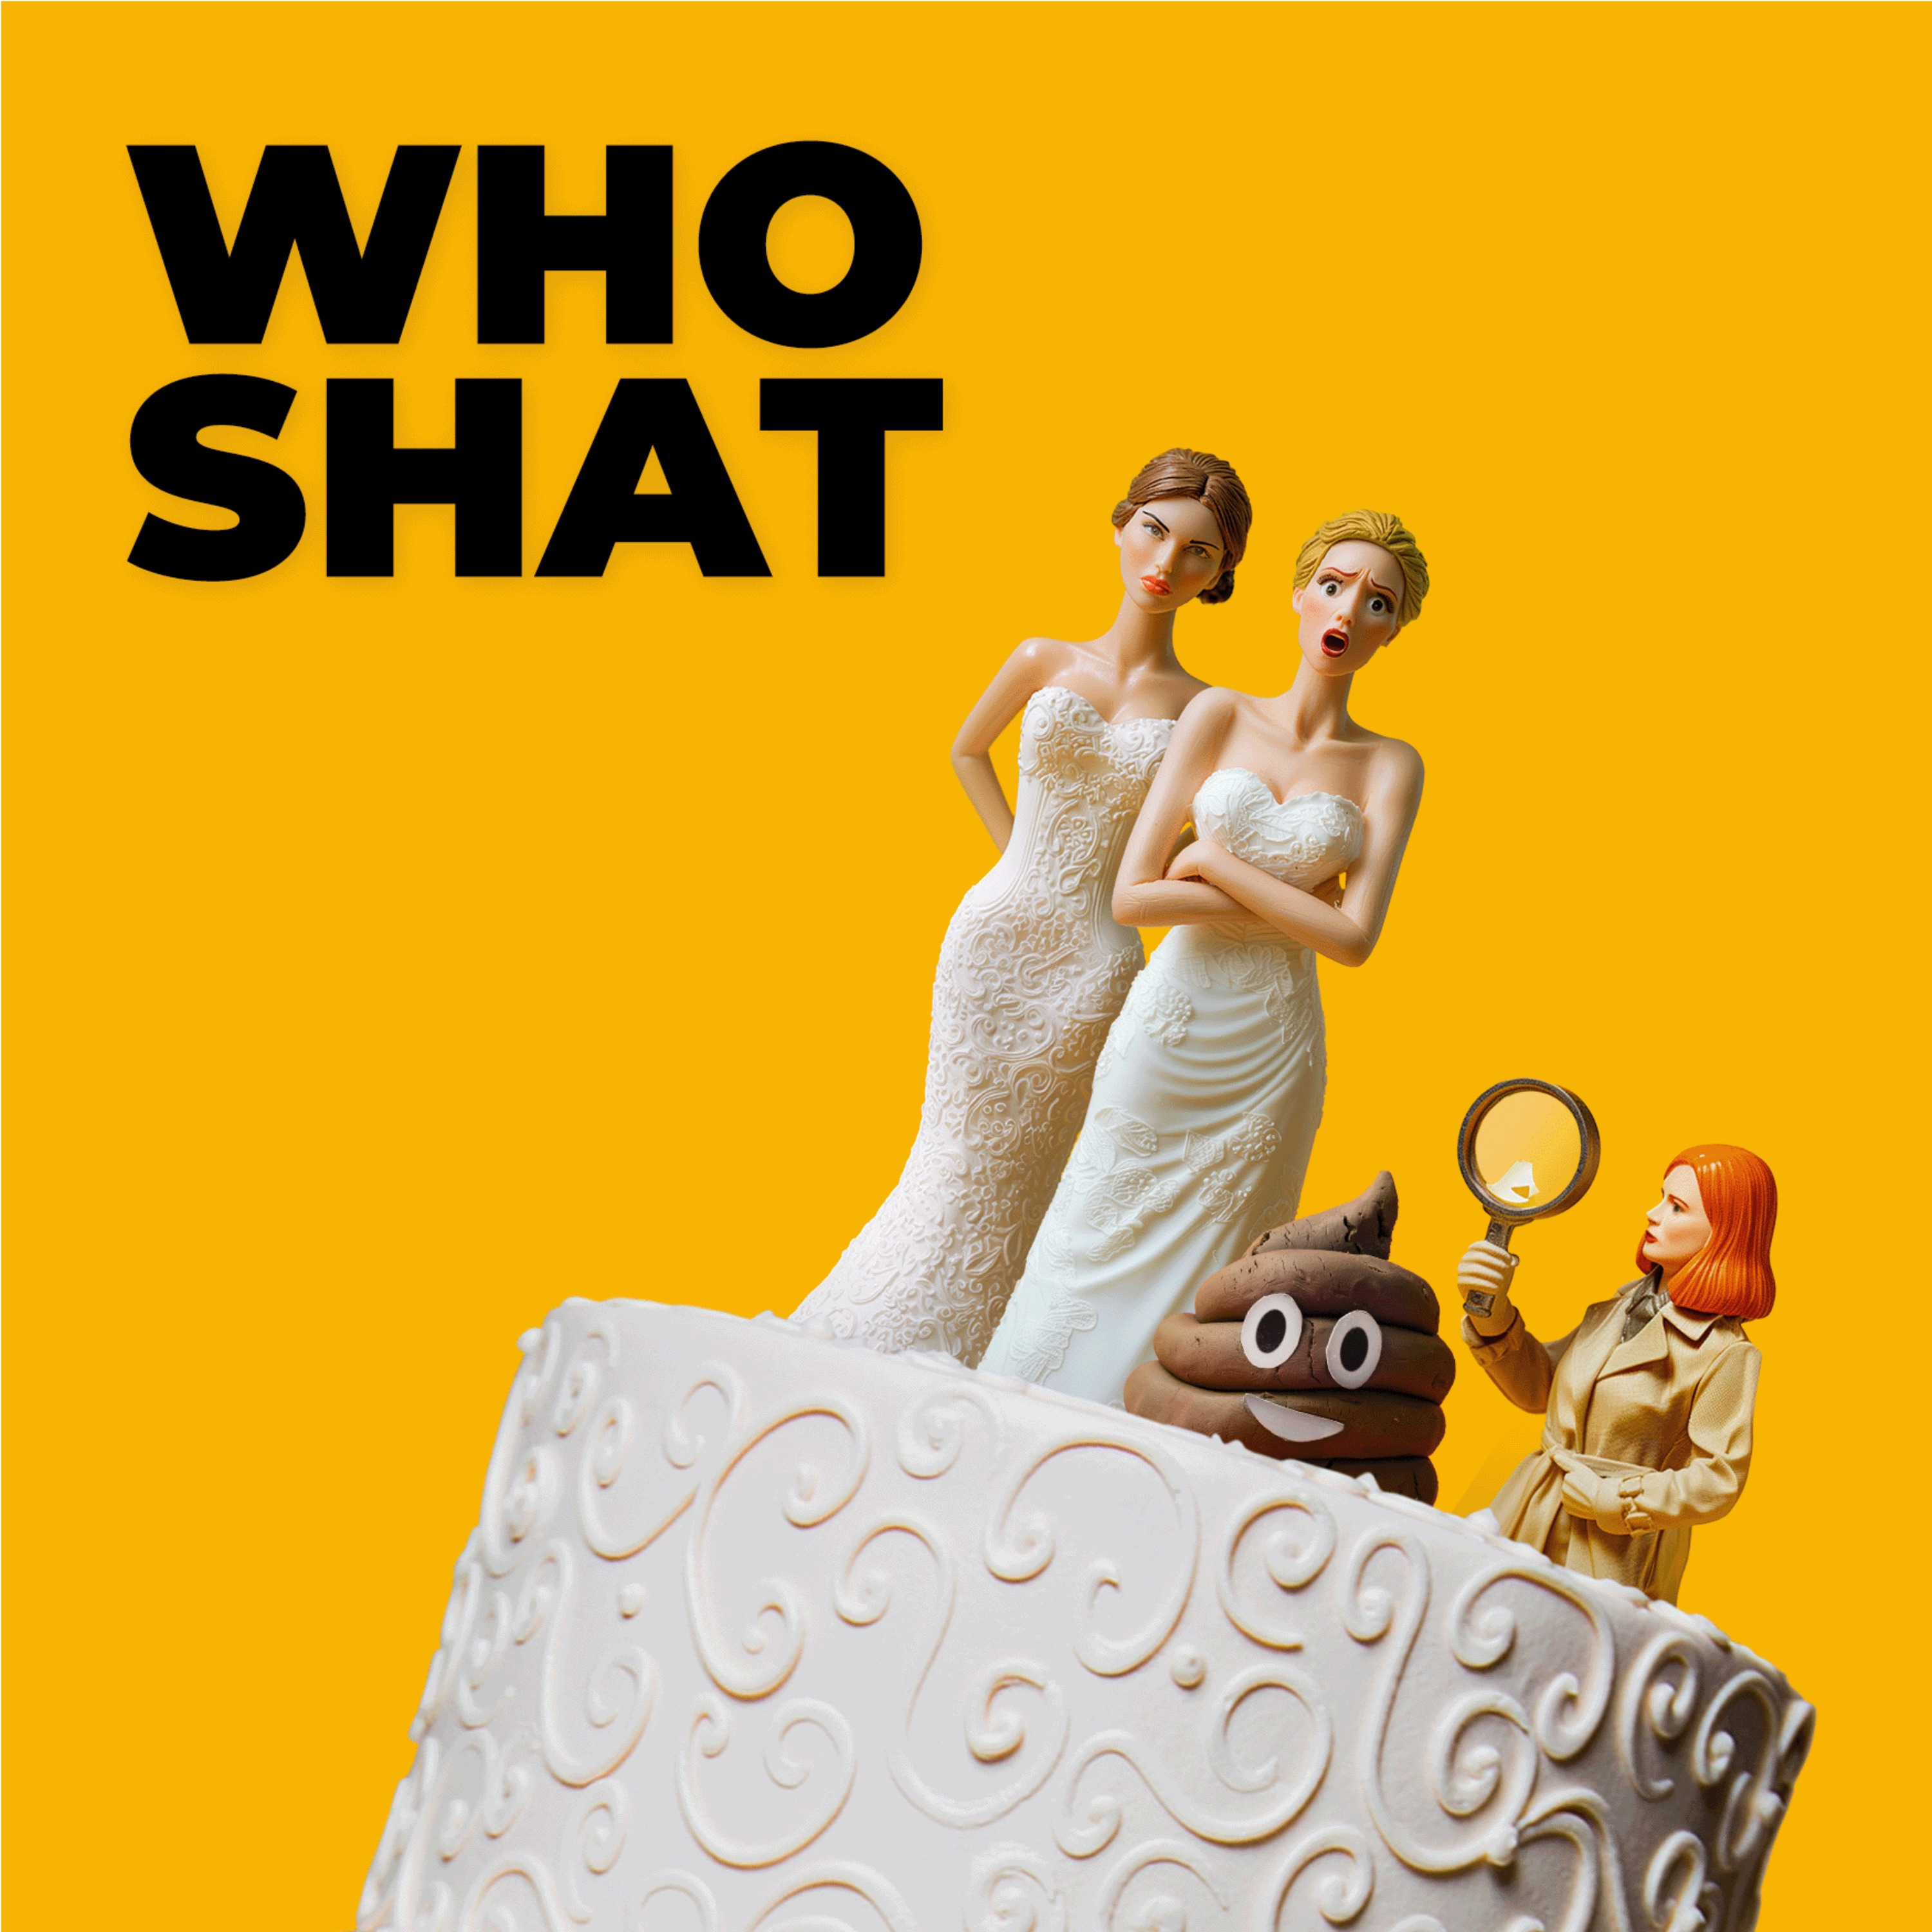 cover art for S1 E11 Who shat on the floor at my wedding? 'Bad cop'